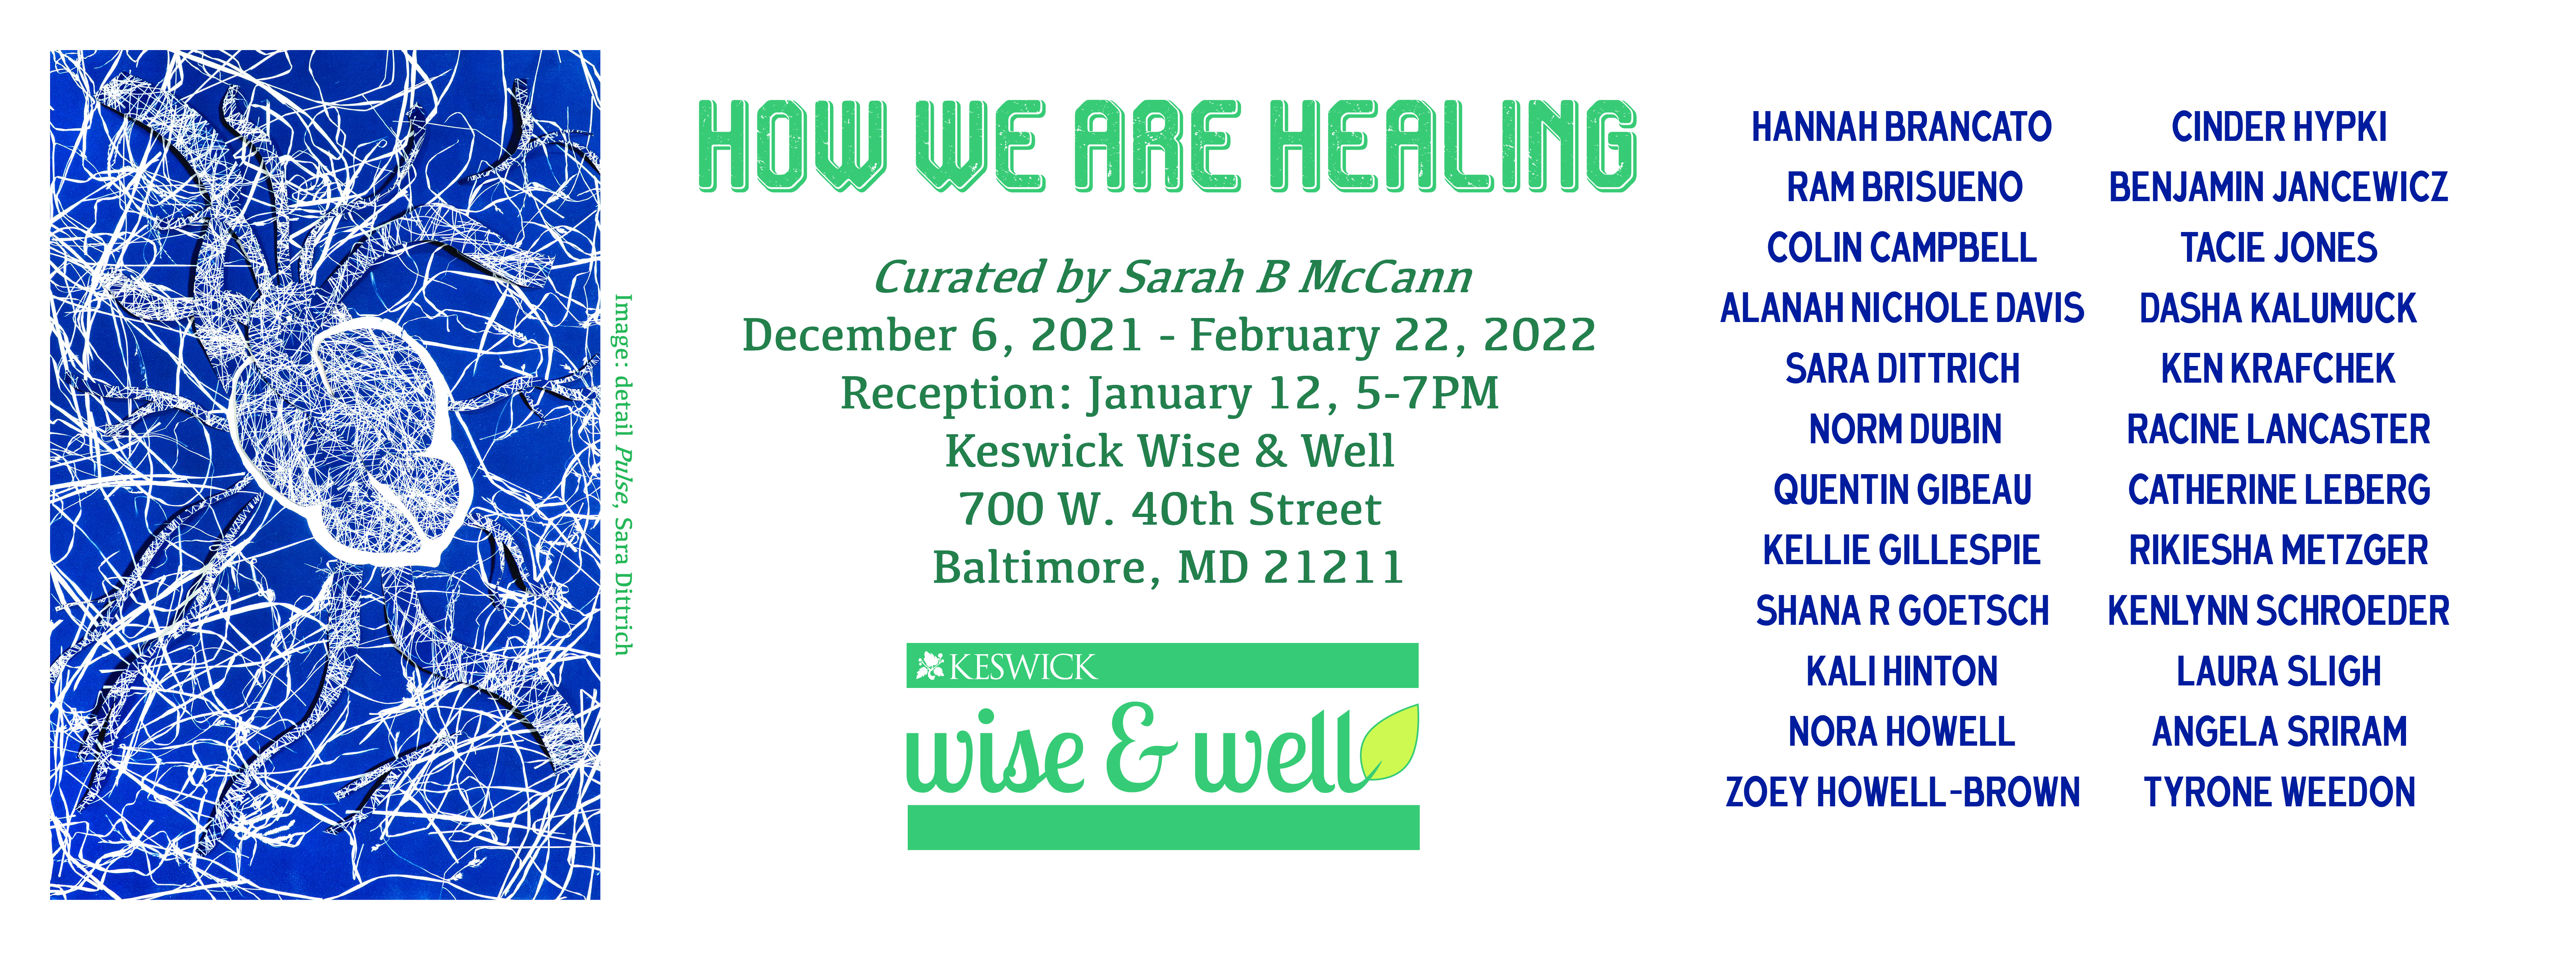 How We Are Healing curated by Sarah B McCann December 6 - February 22 Keswick Wise & Well 